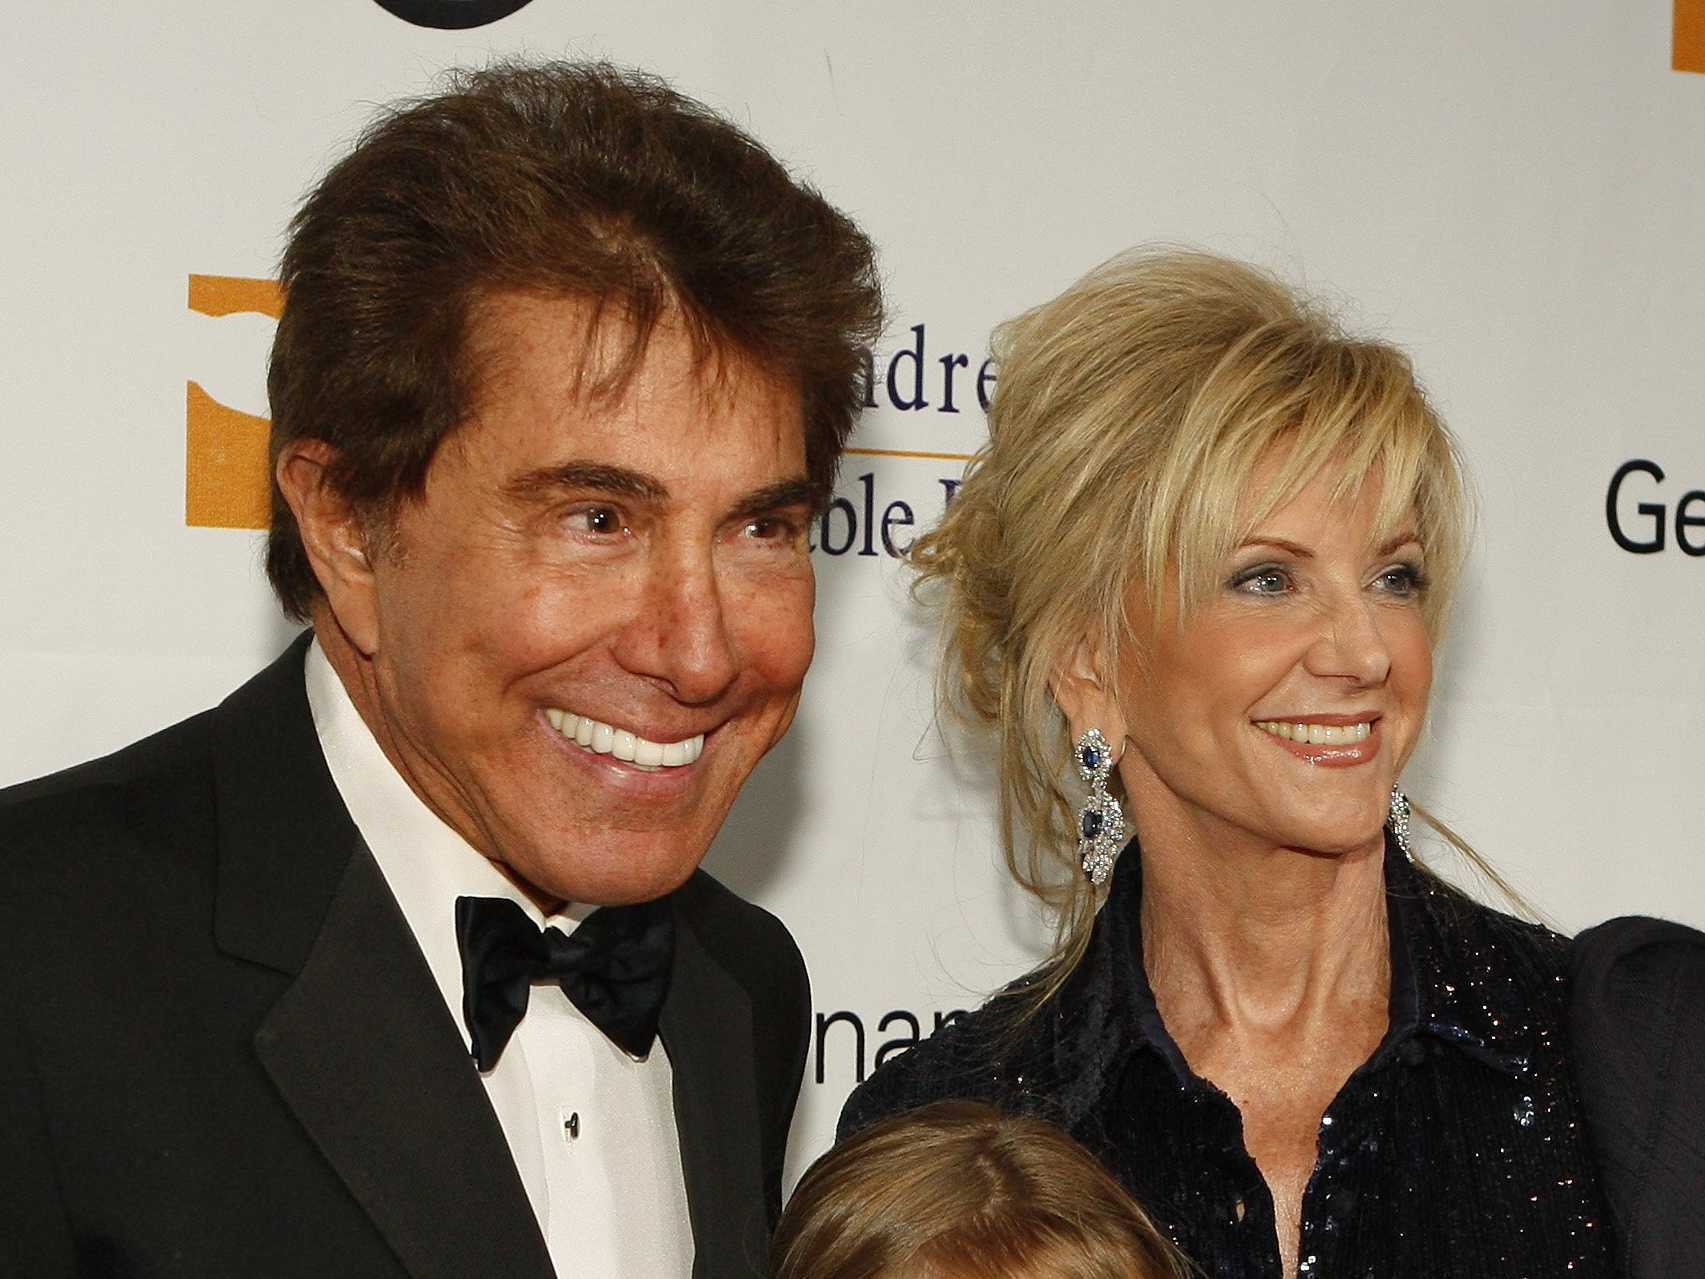 Shareholder Agreement Between Steve Wynn and ExWife Invalidated By Judge